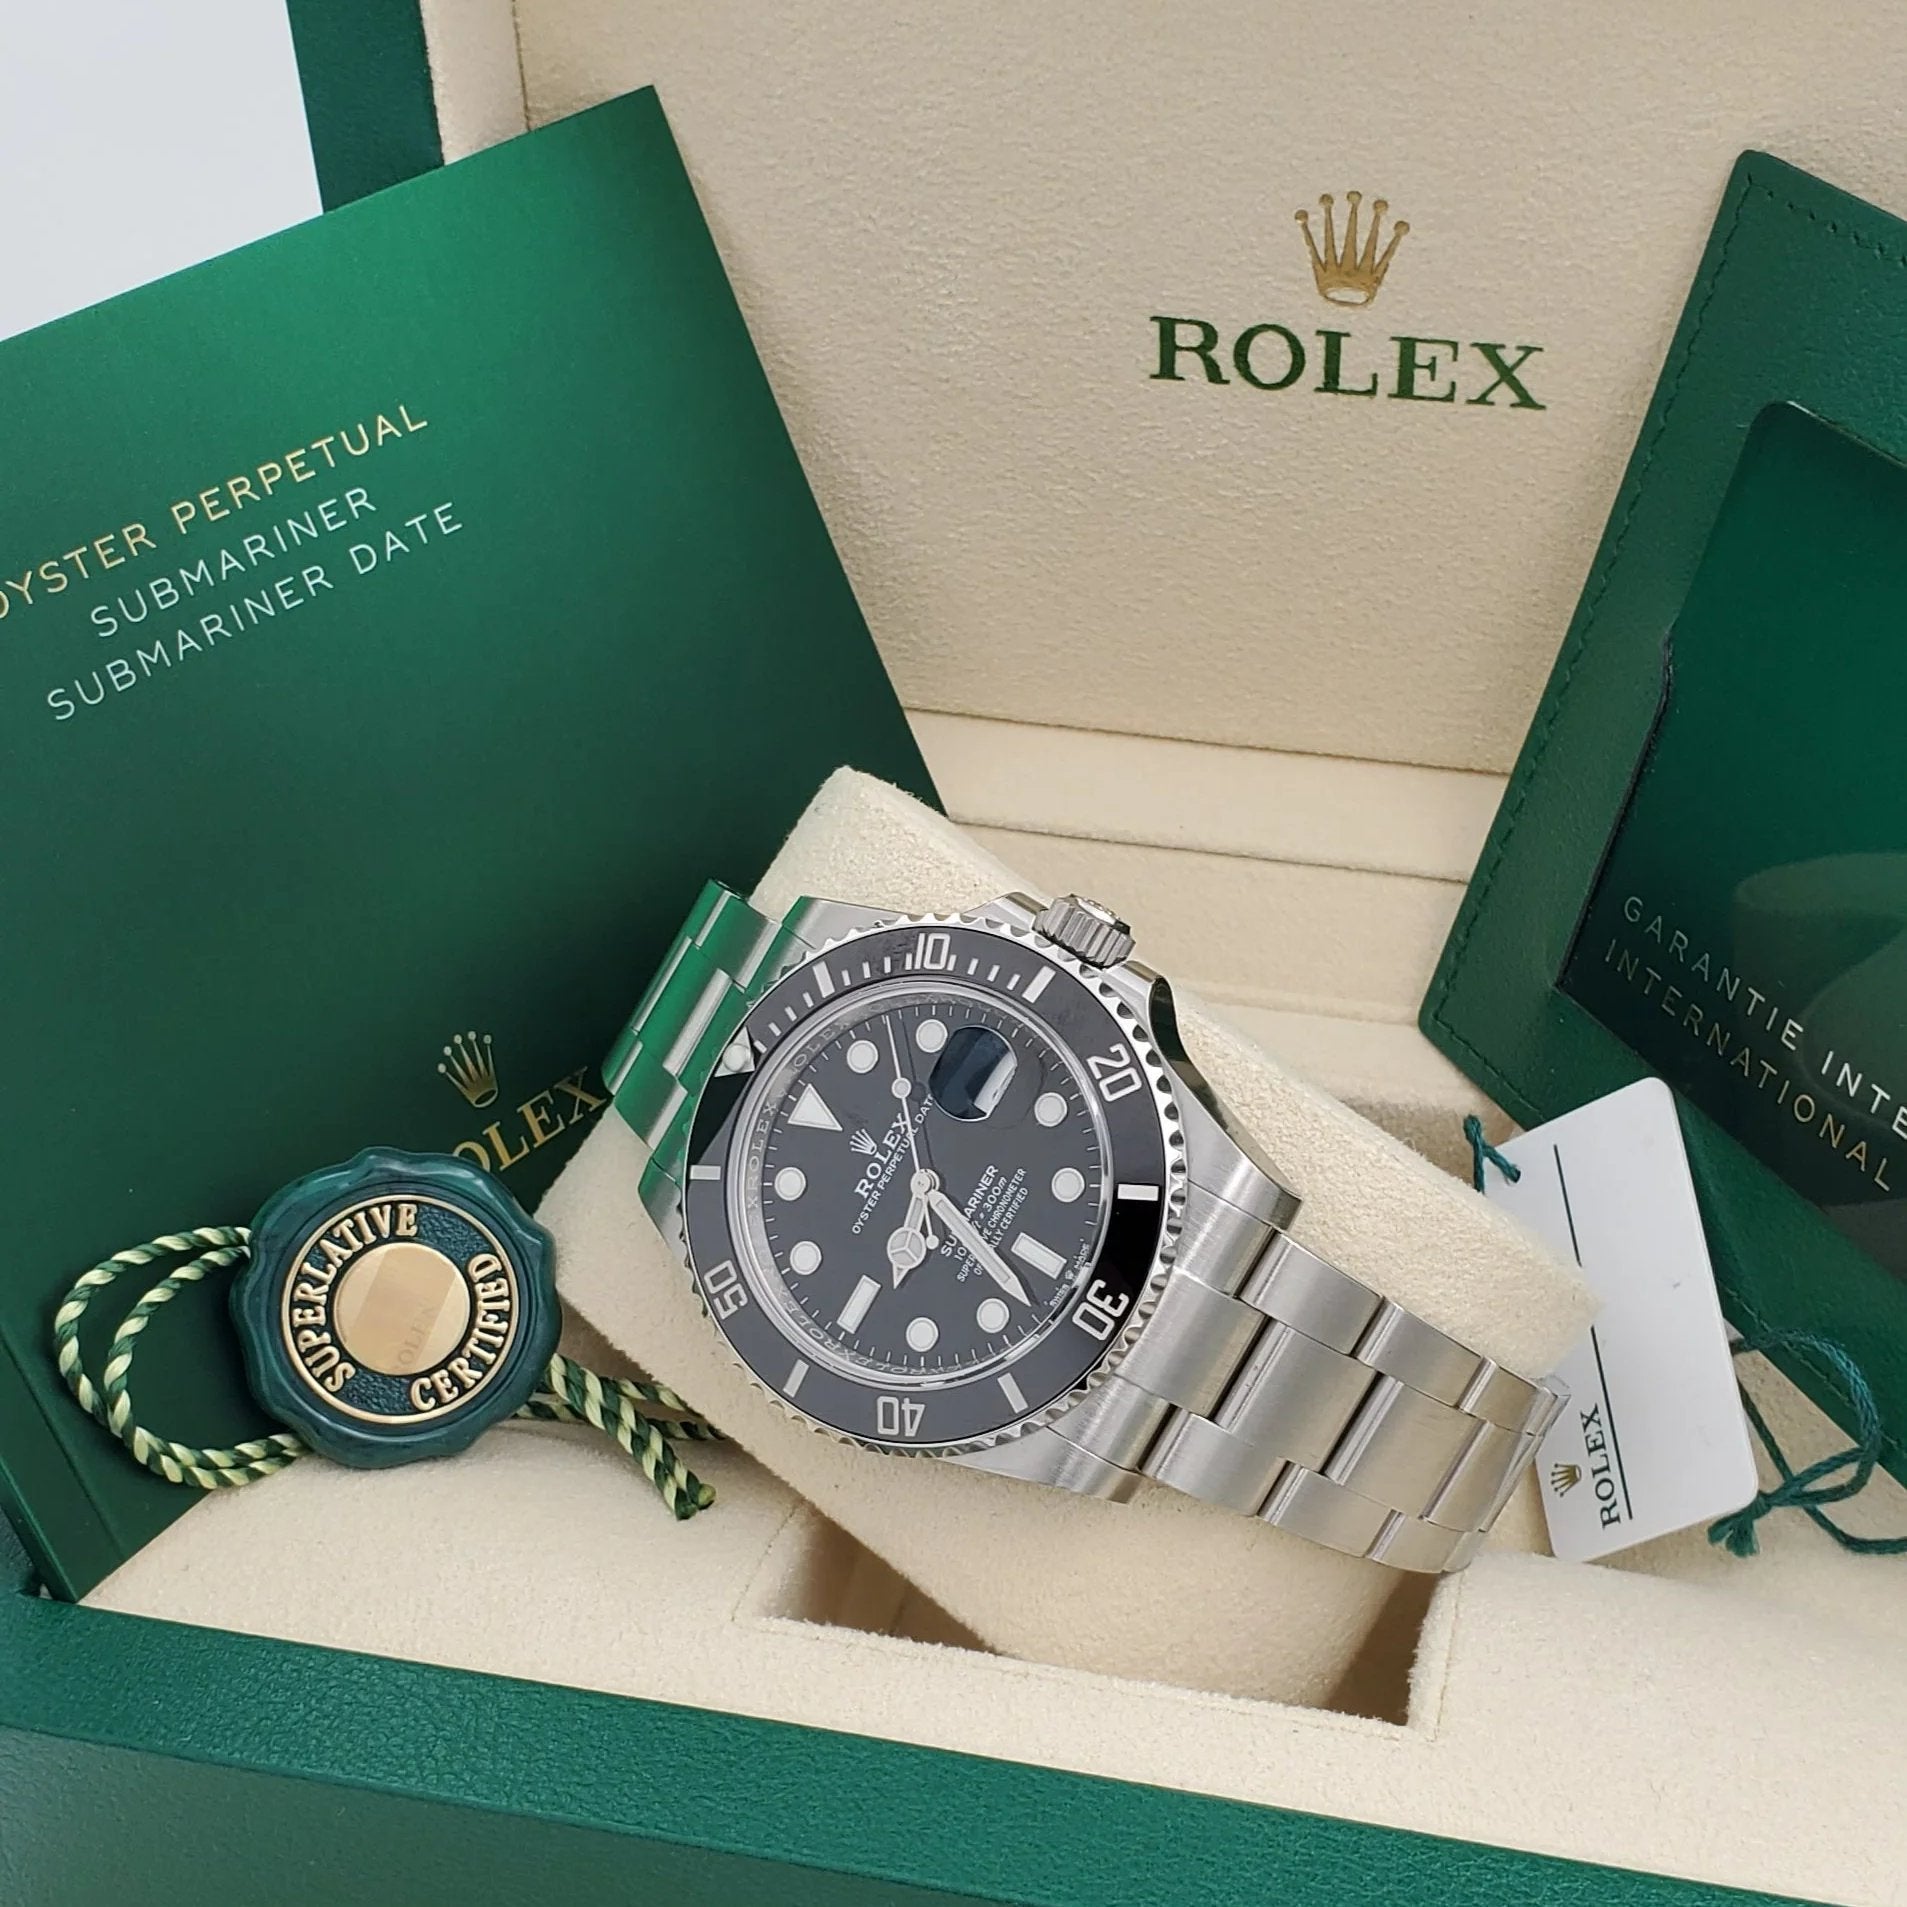 Men's Rolex 41mm Submariner Date Oyster Perpetual Stainless Steel Watch with Black Dial and Black Bezel. (NEW 126610LN)